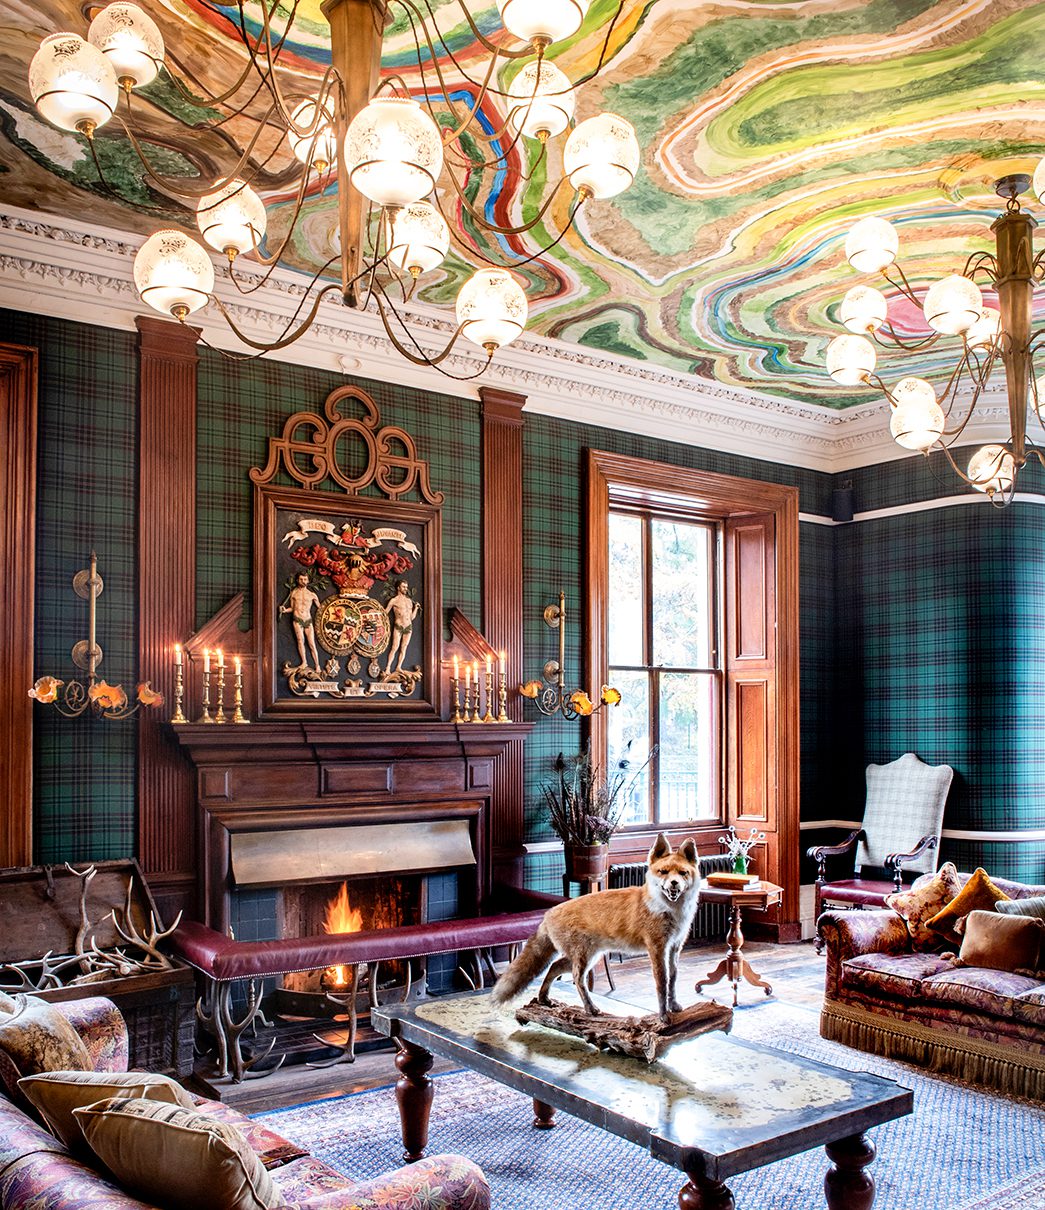 A warm fireplace and whiskey - that's what the Drawing Room is all about